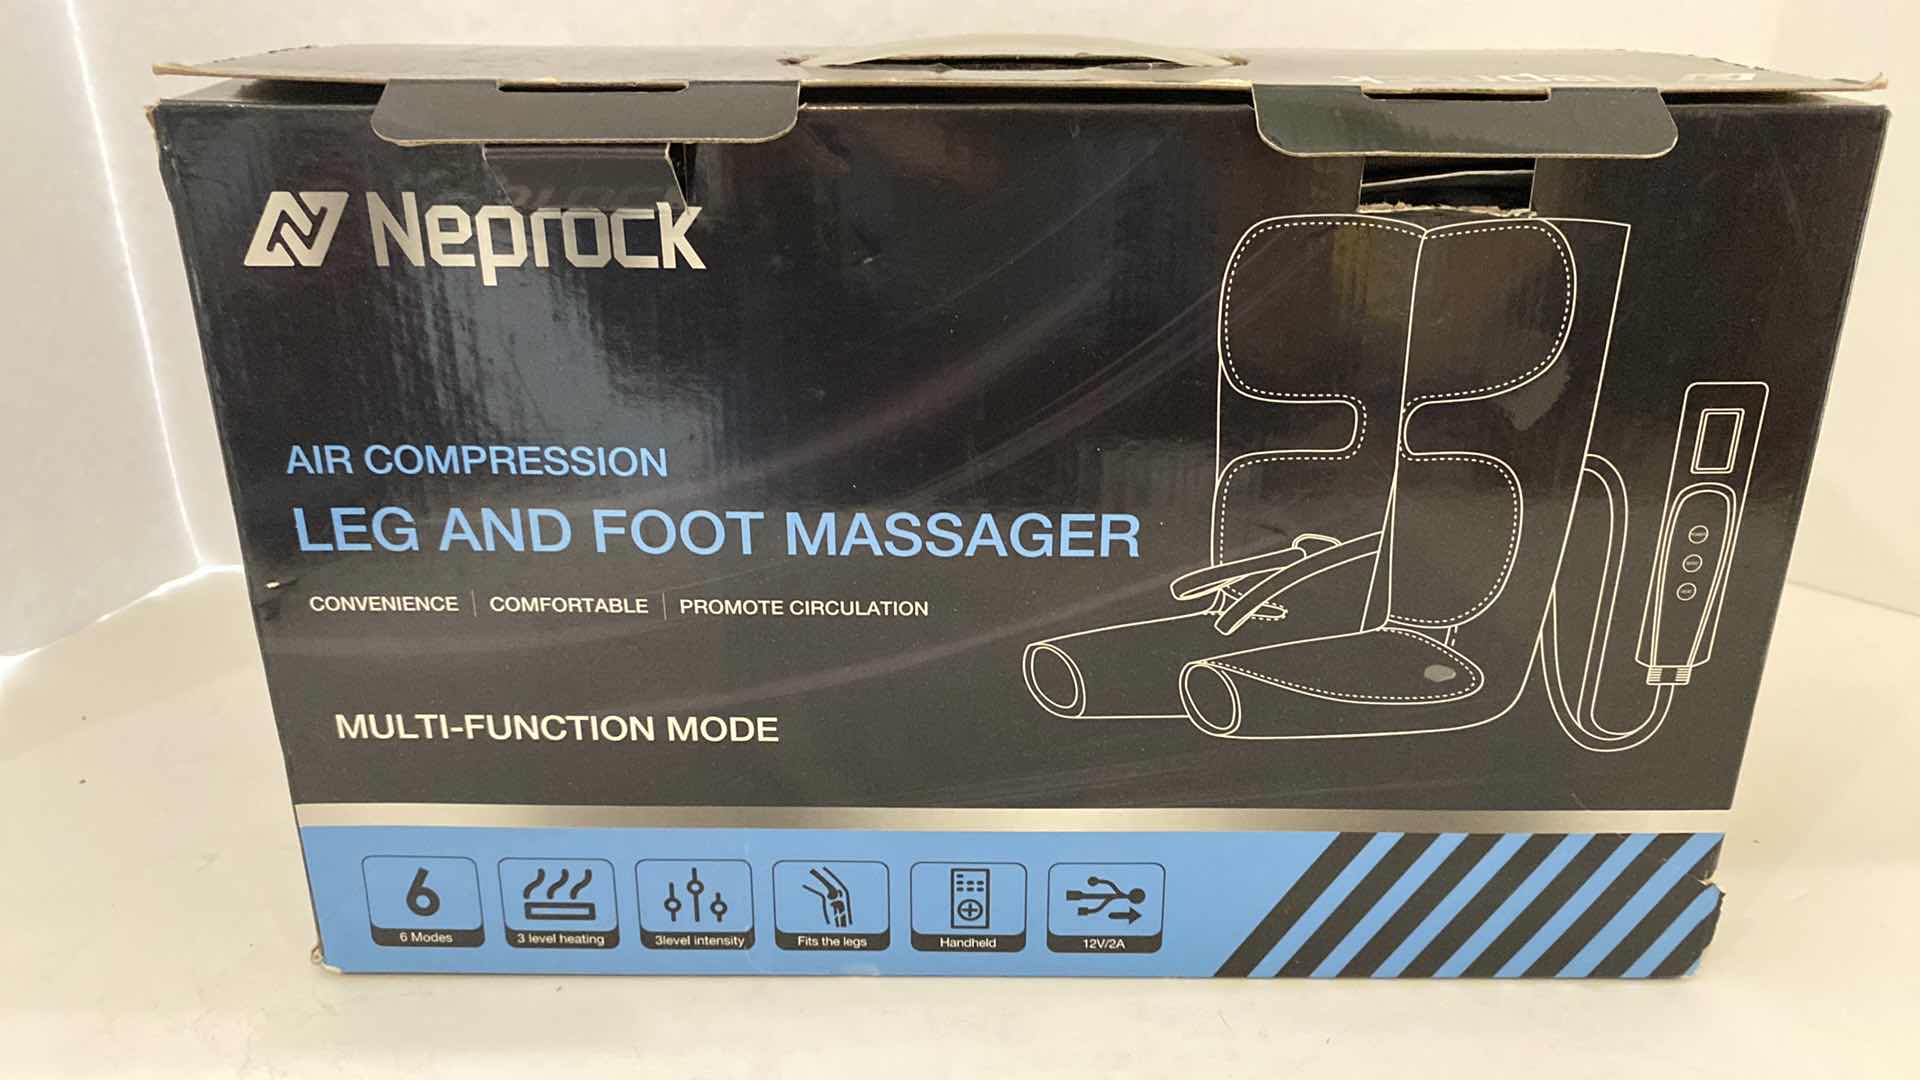 Photo 1 of NEPROCK AIR COMPRESSION LEG AND FOOT MASSAGER